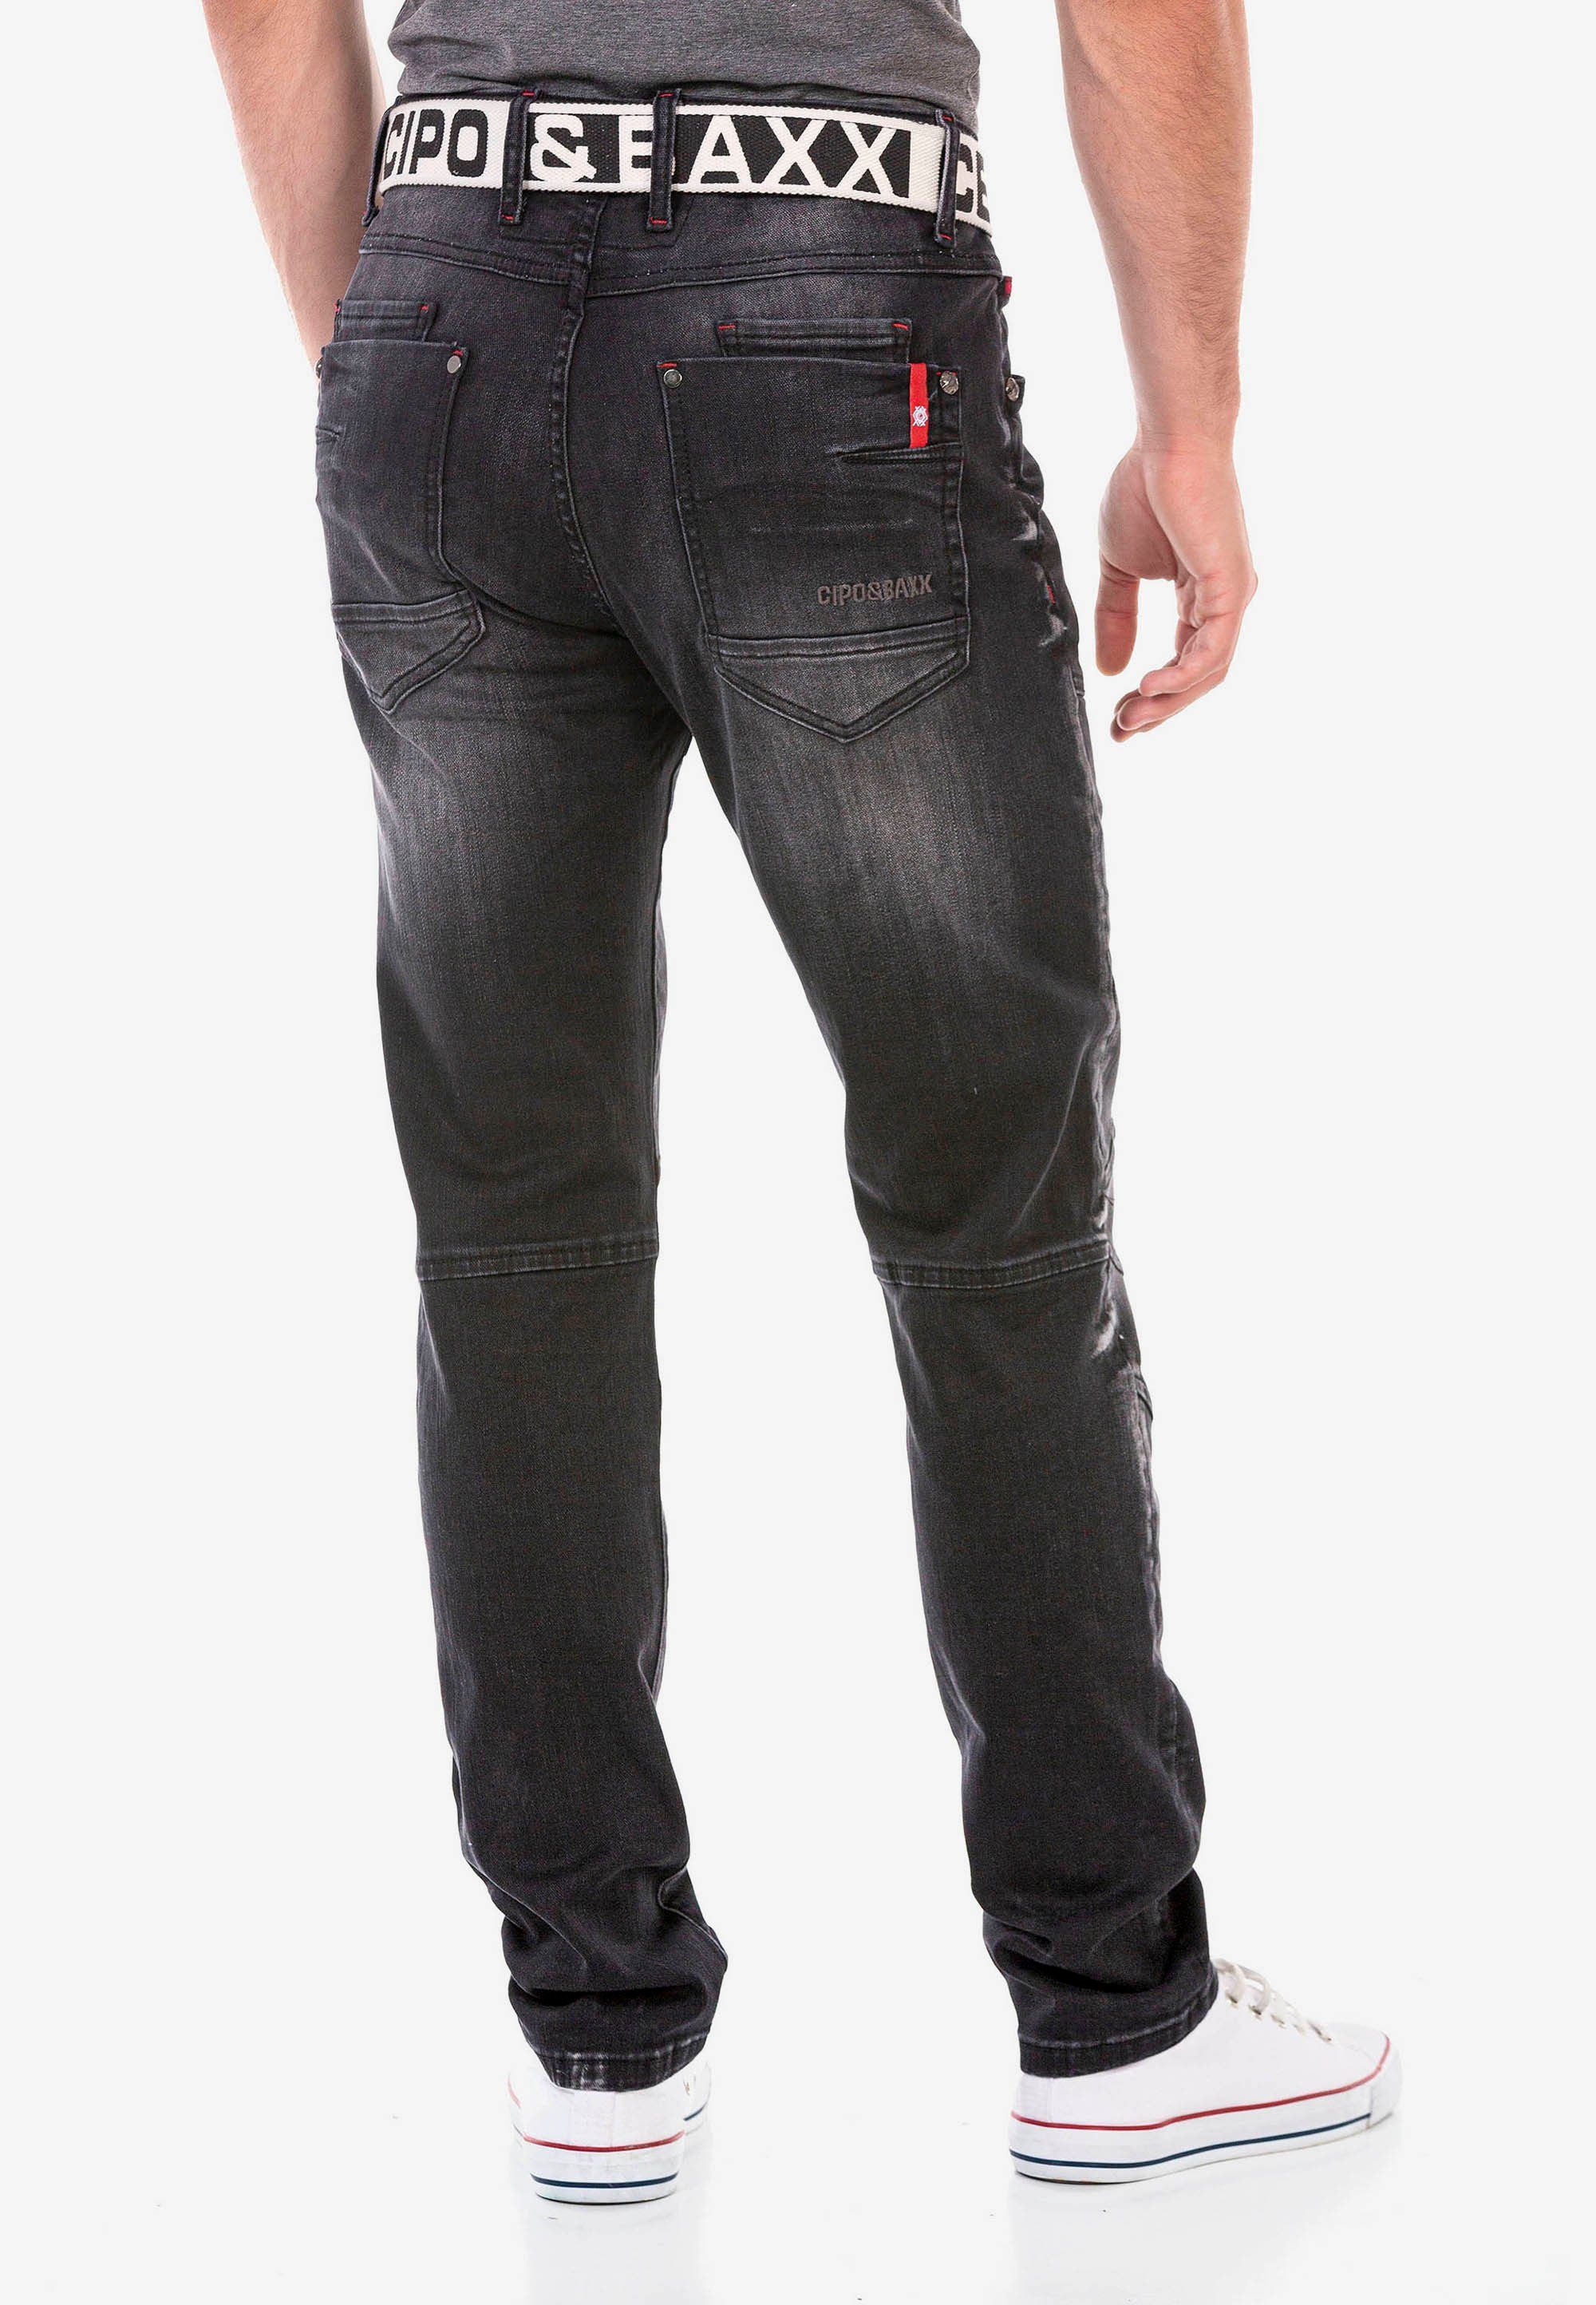 & Cipo Straight-Jeans mit Baxx cooler Used-Waschung